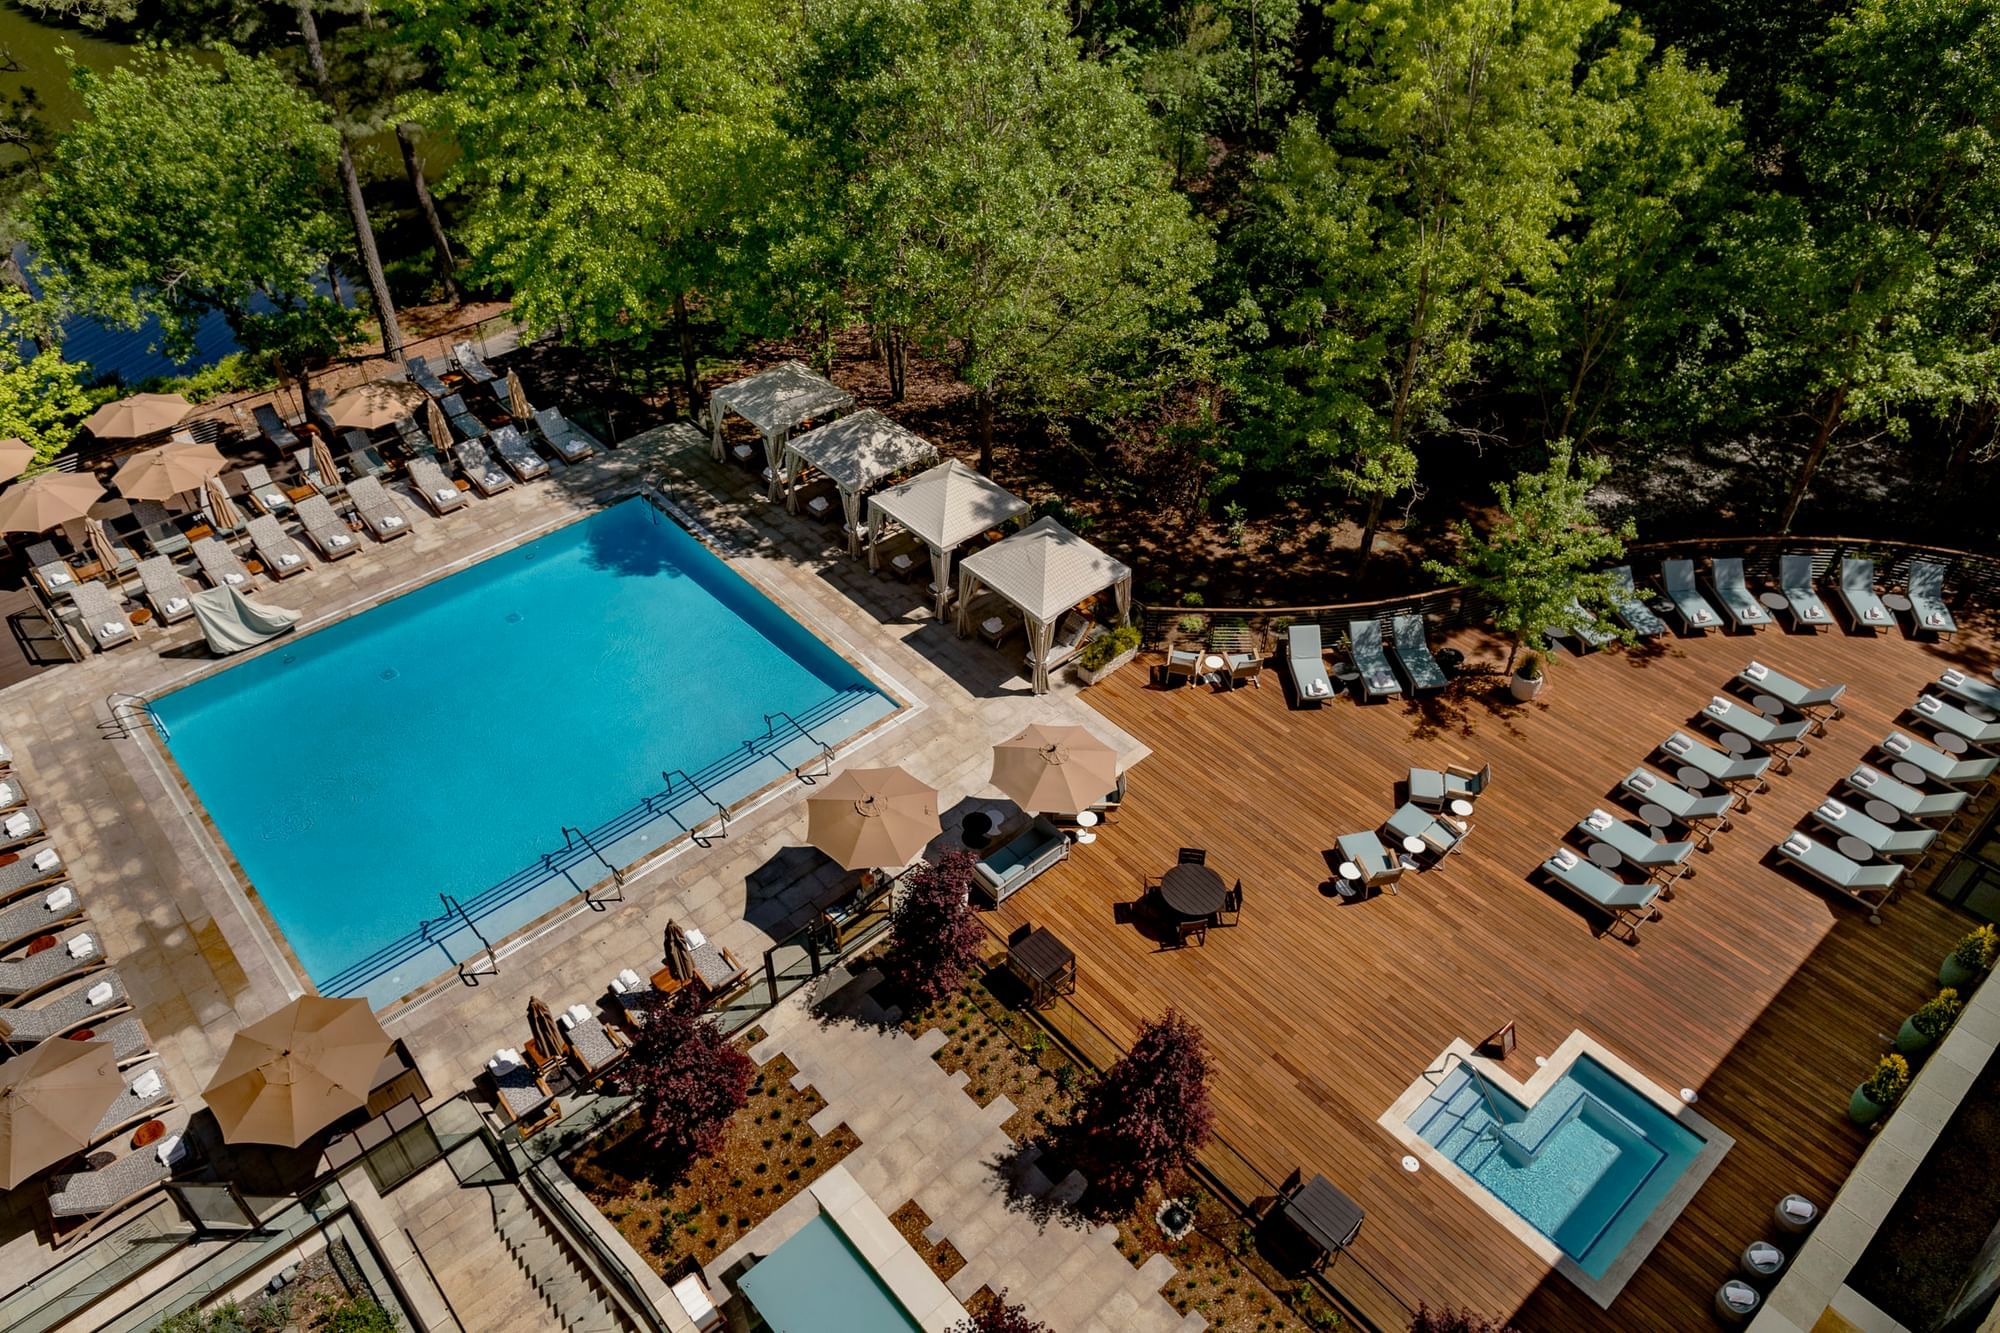 Luxury Spa in Raleigh, NC - The Umstead Hotel and Spa